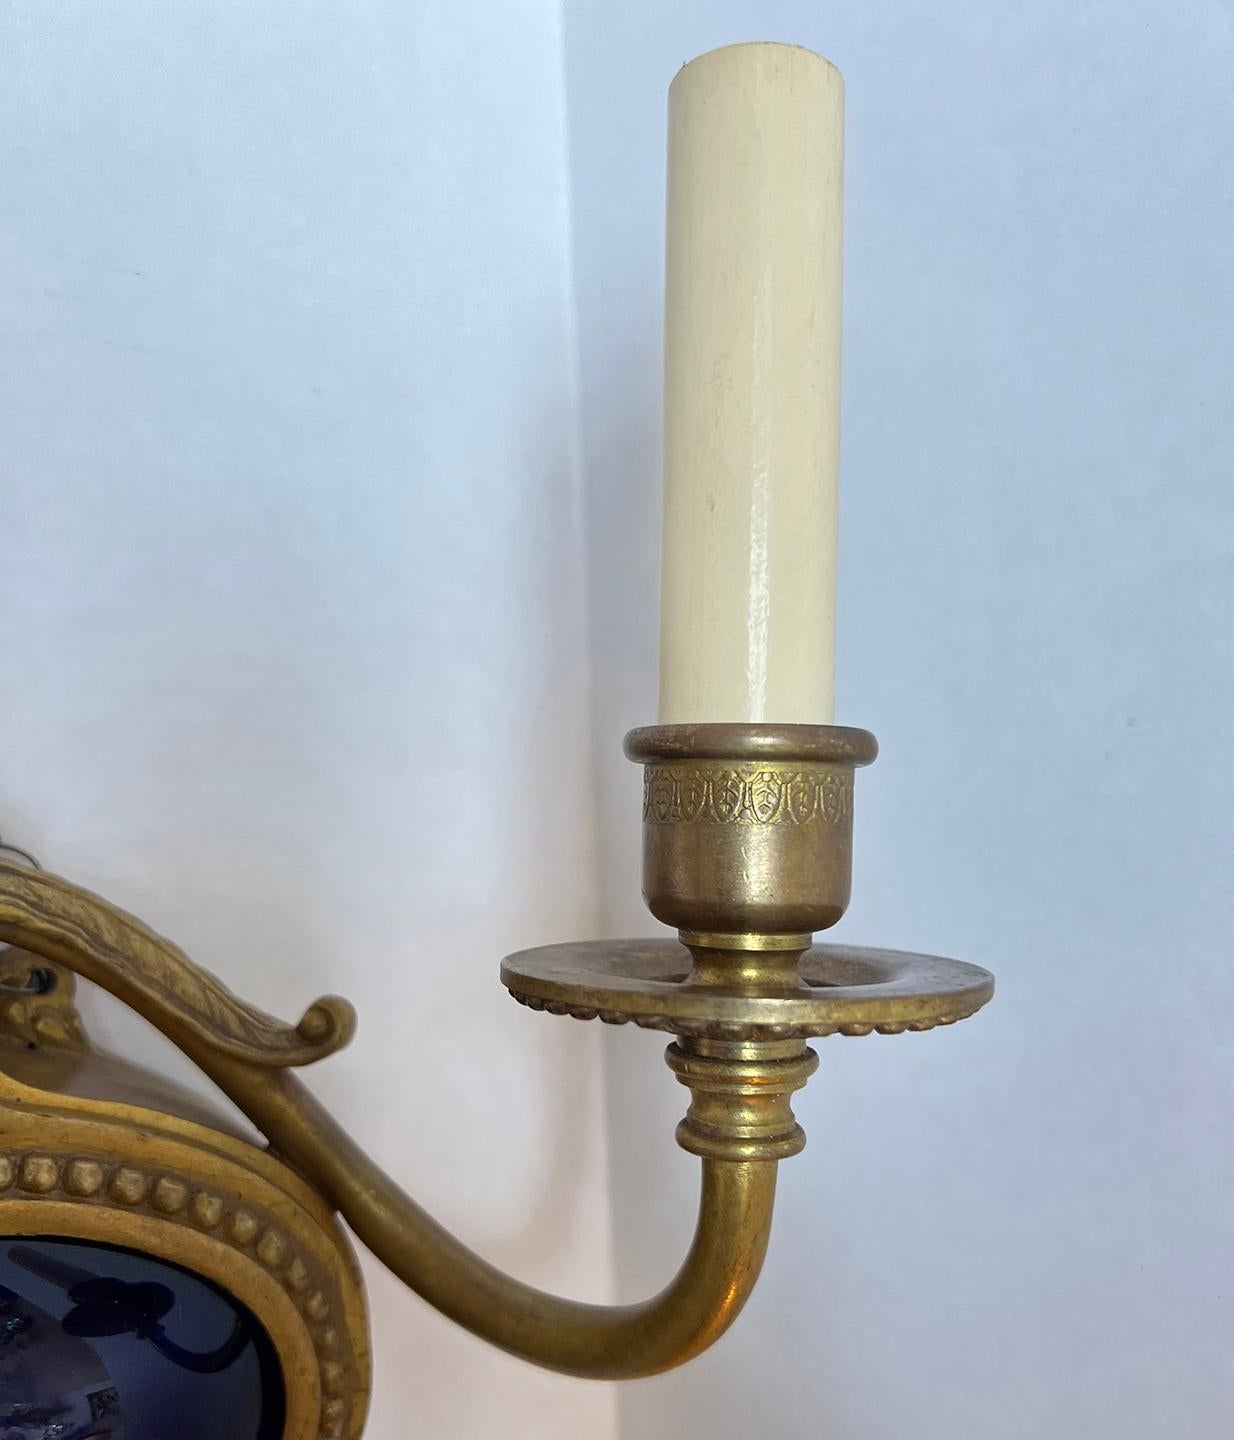 Pair of circa 1920's French neoclassic style sconces.

Measurements:
Height: 11